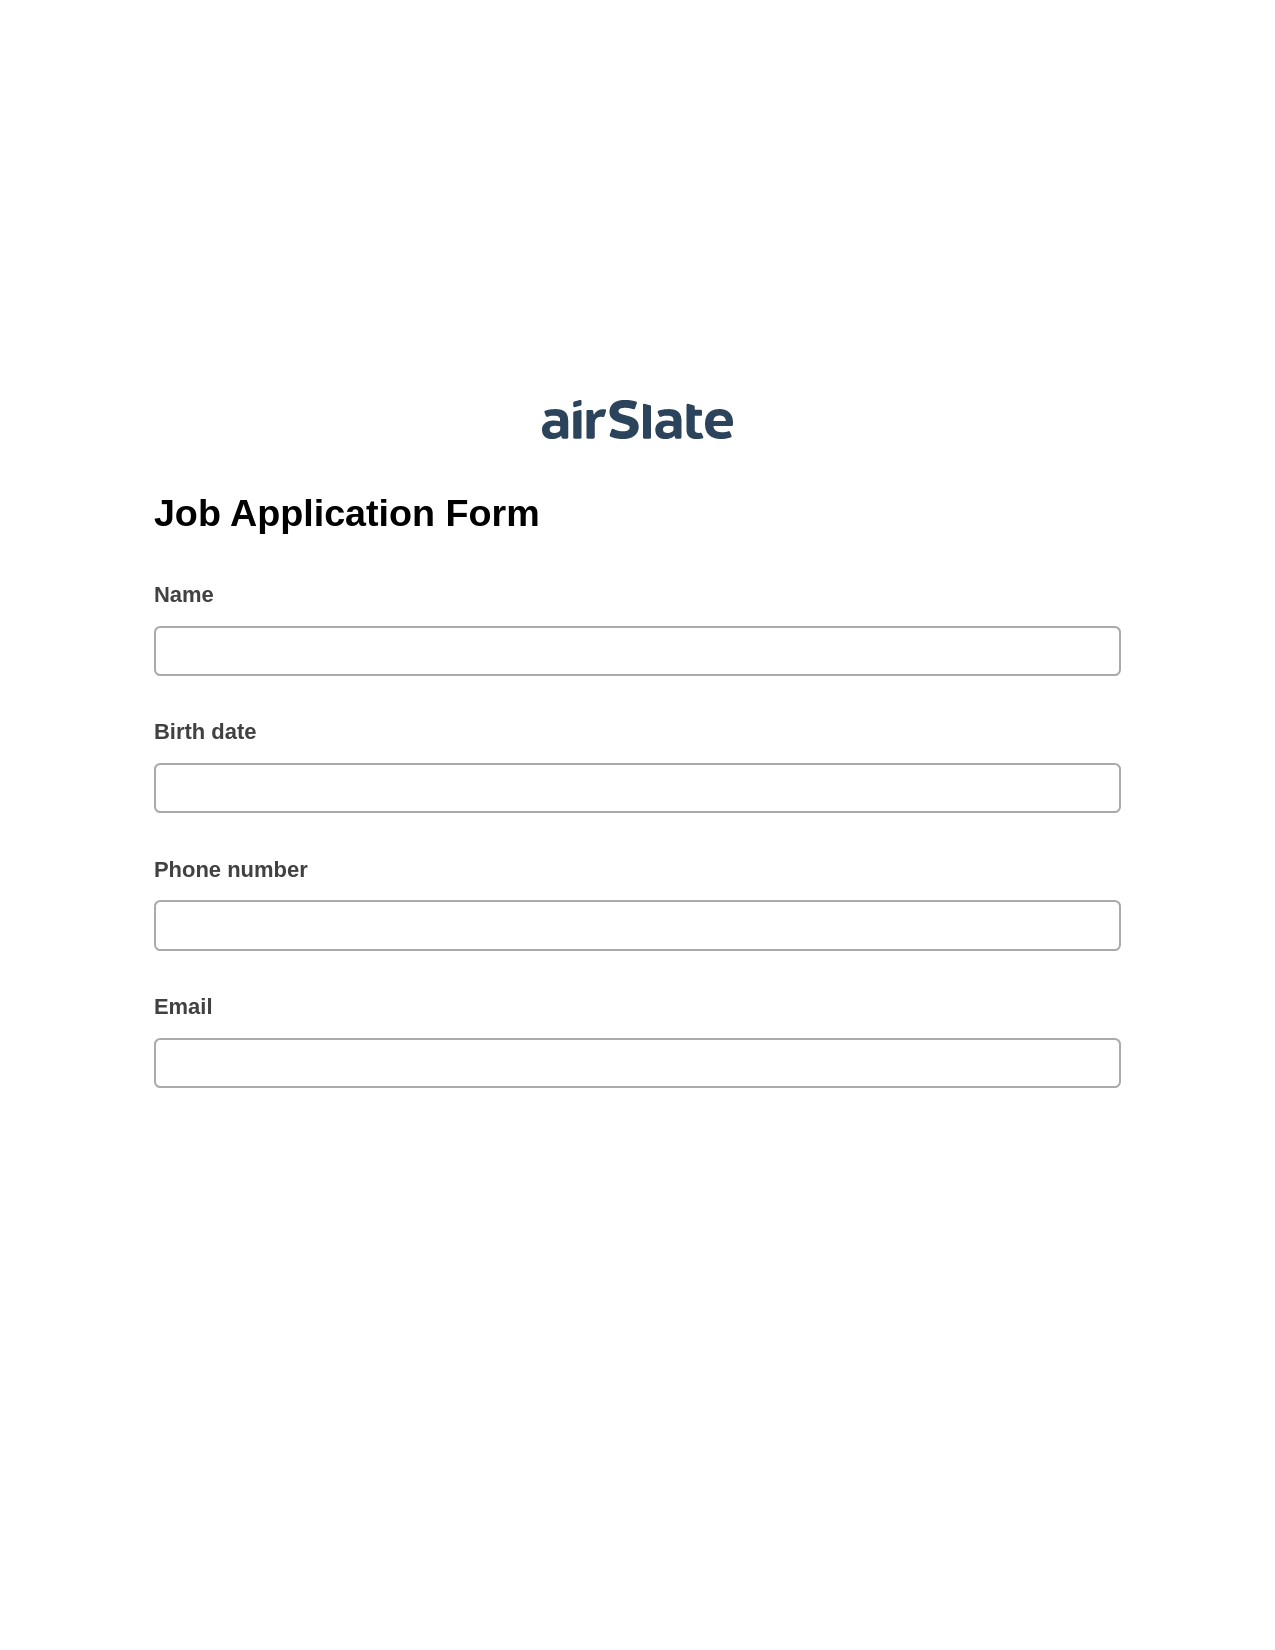 Job Application Form Pre-fill from Excel Spreadsheet Dropdown Options Bot, In-person Signing Bot, Export to NetSuite Record Bot